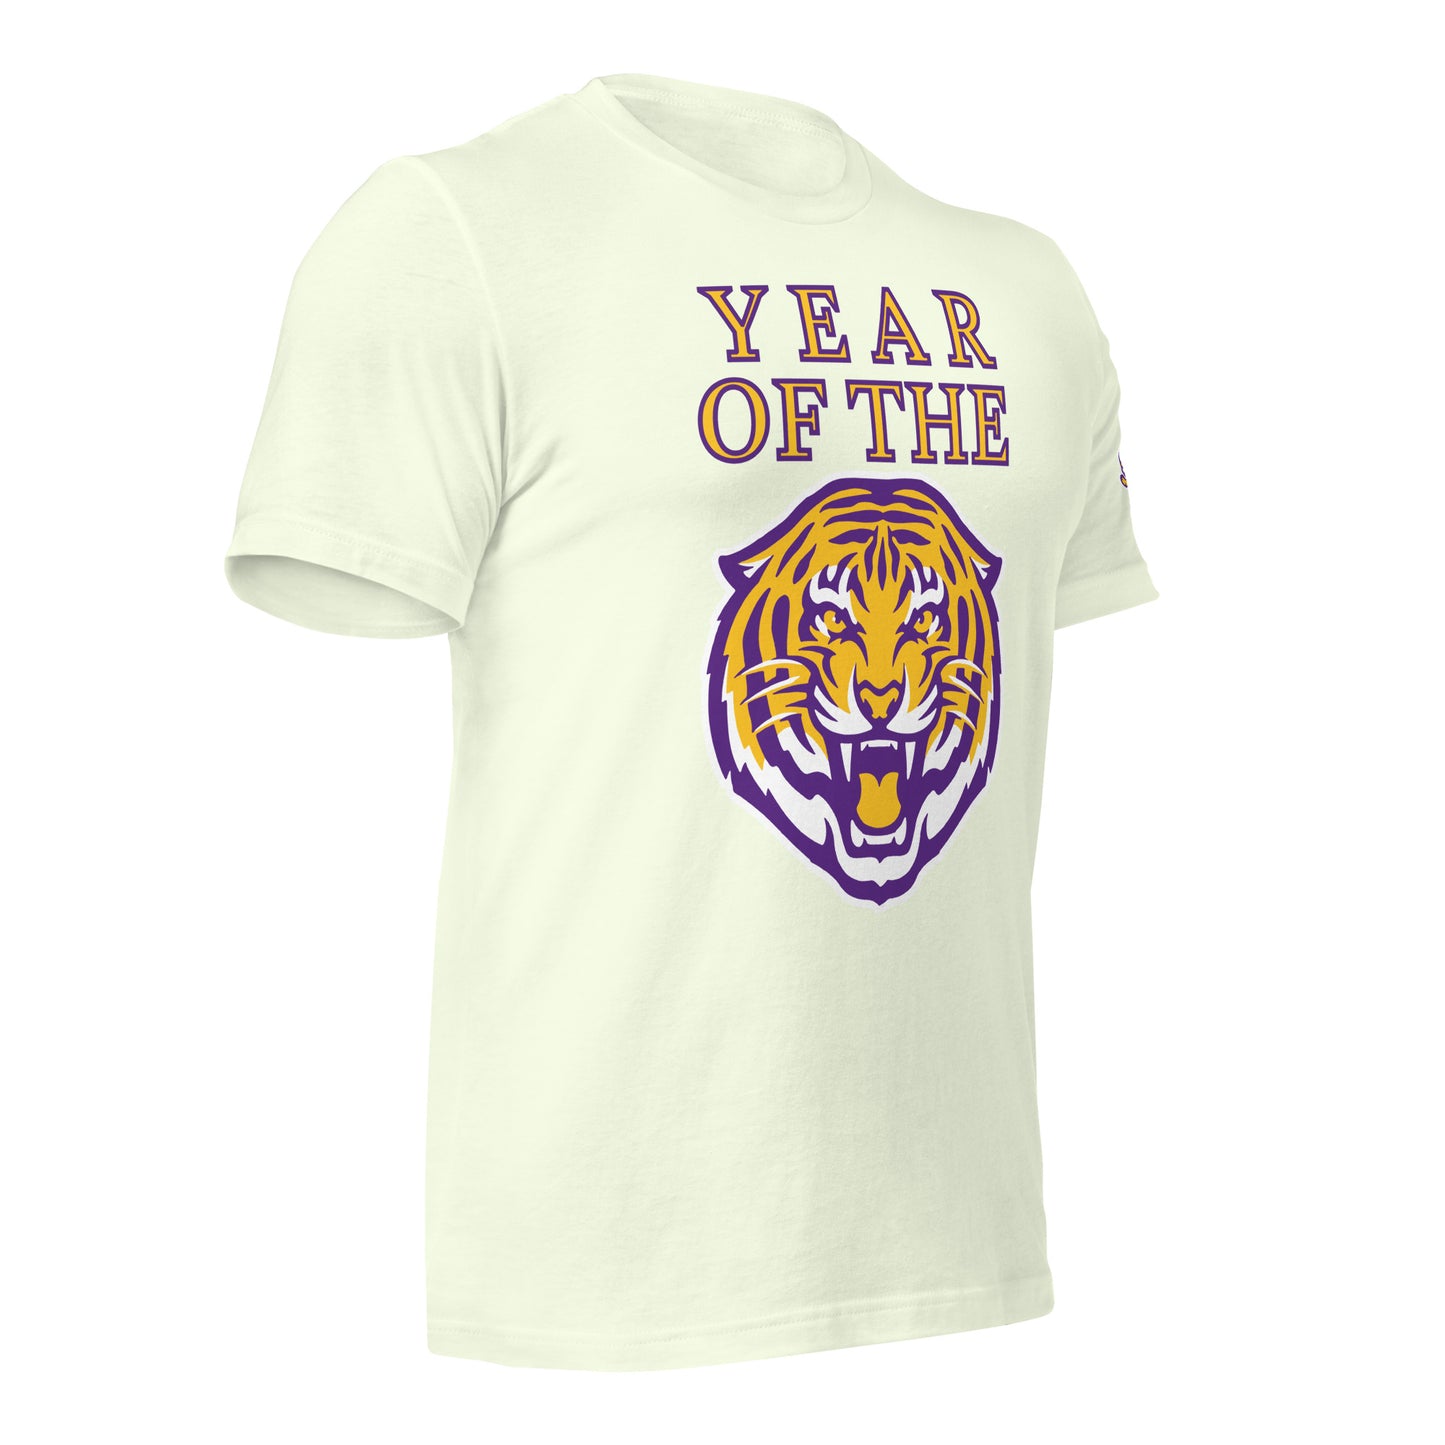 YEAR OF THE TIGER/ TROPHY MIKE ON SLEEVE - BELLA+CANVAS - Unisex t-shirt